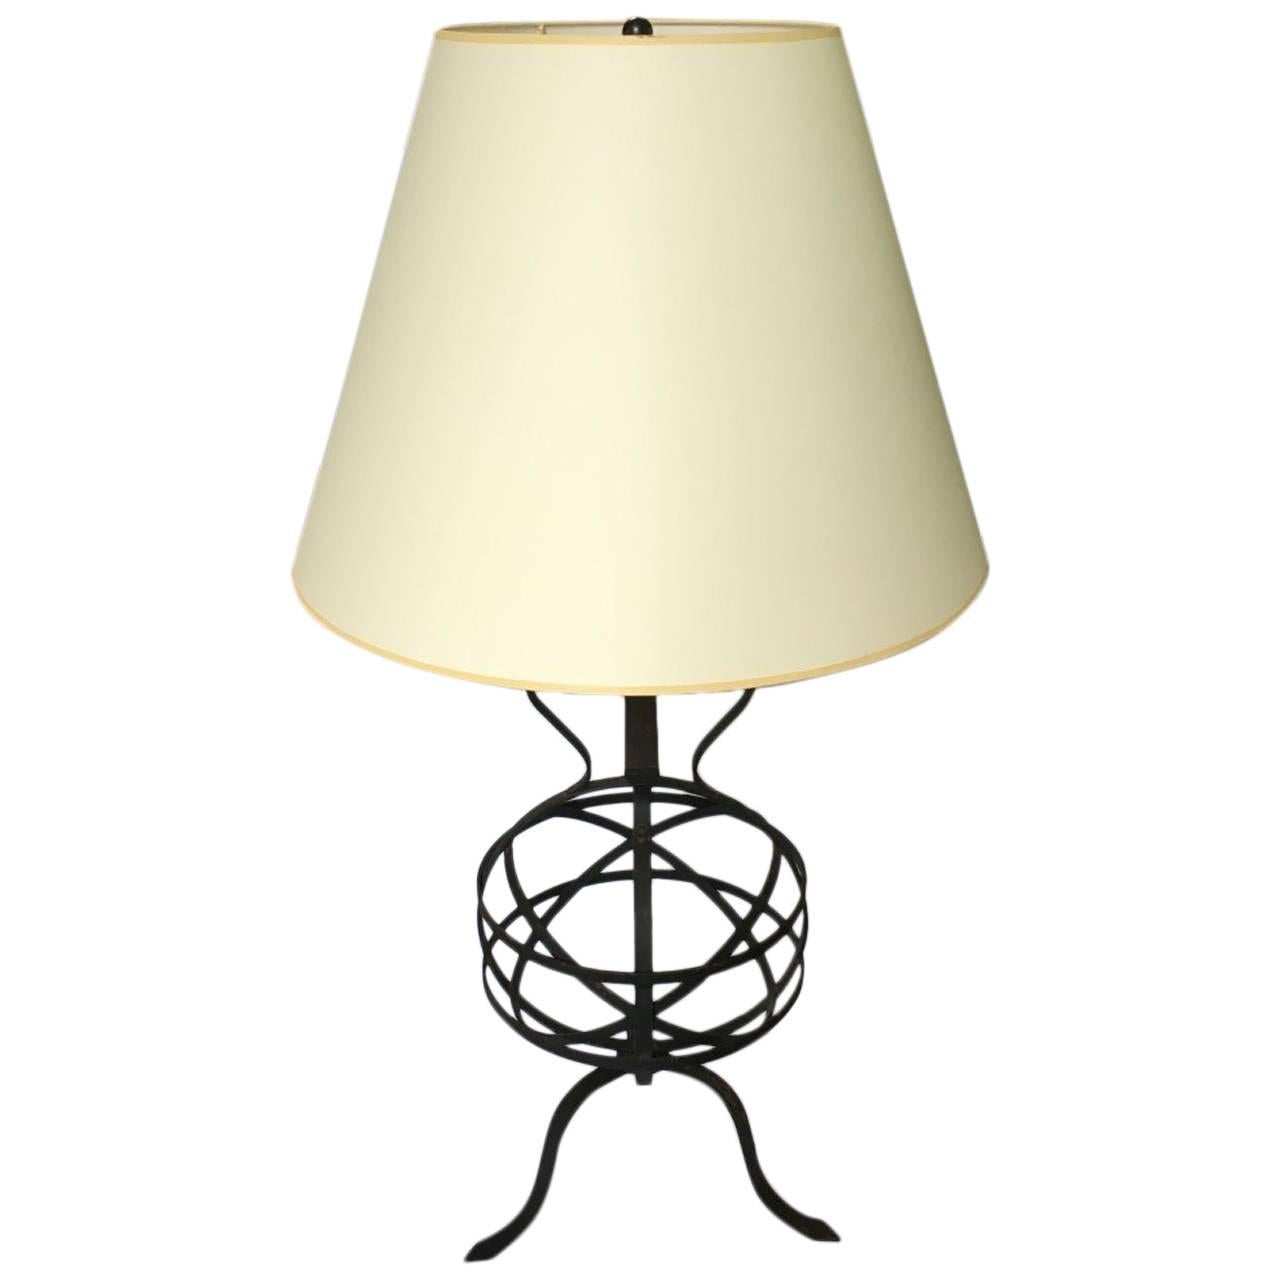 Large Iron Table Lamp